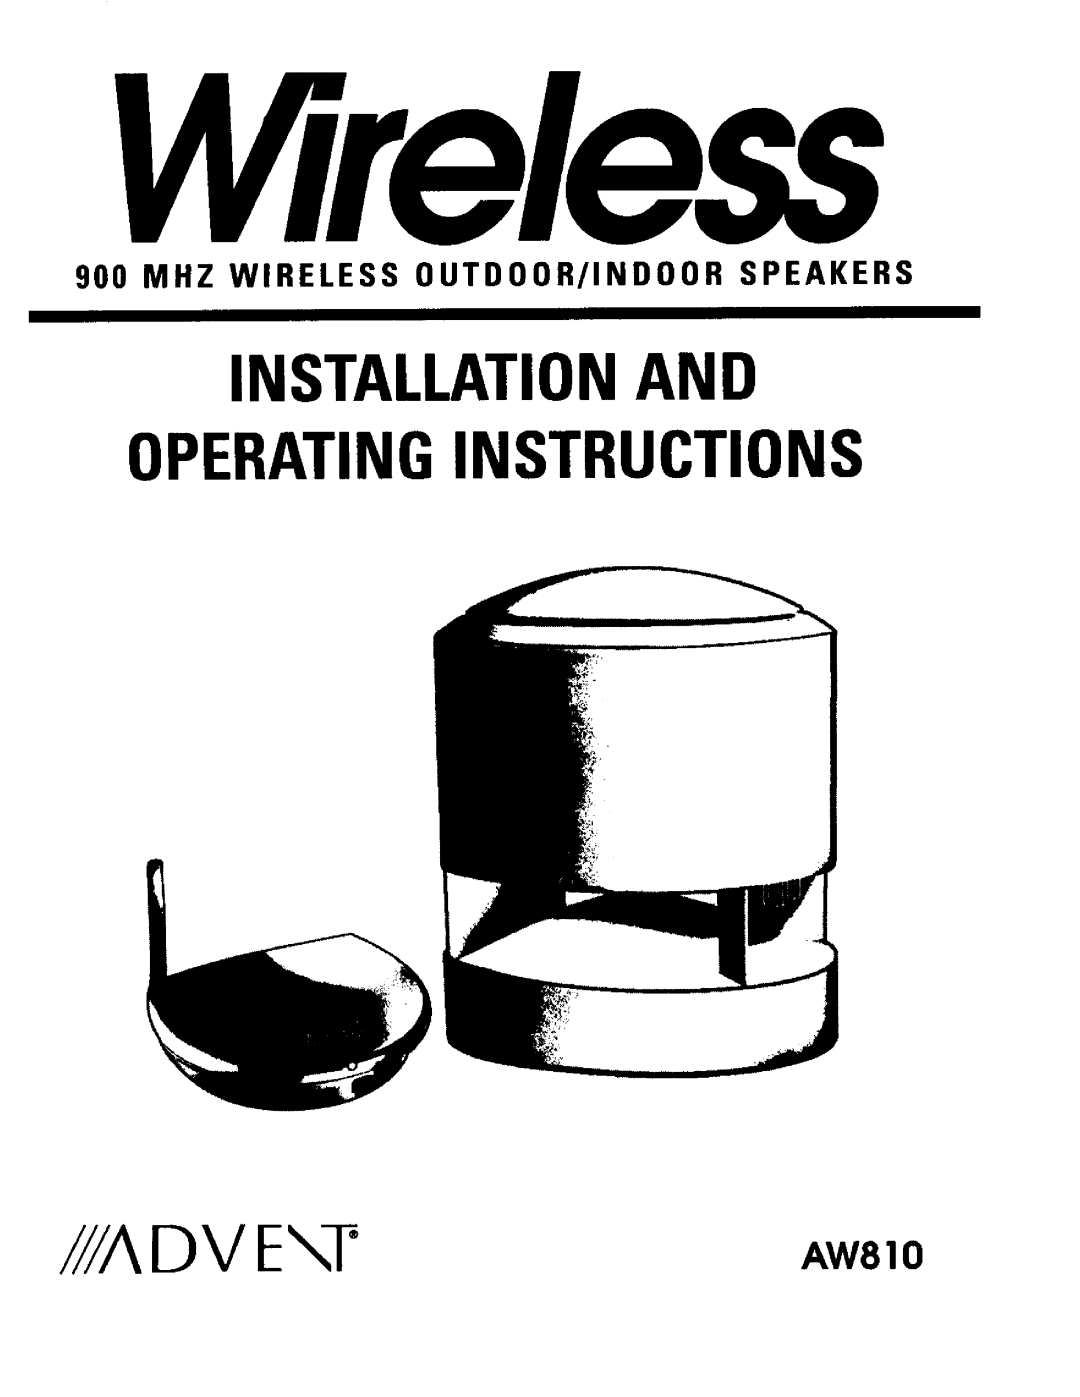 Recoton/Advent AW810 operating instructions Wireless, Installation And, Operating Instructions 